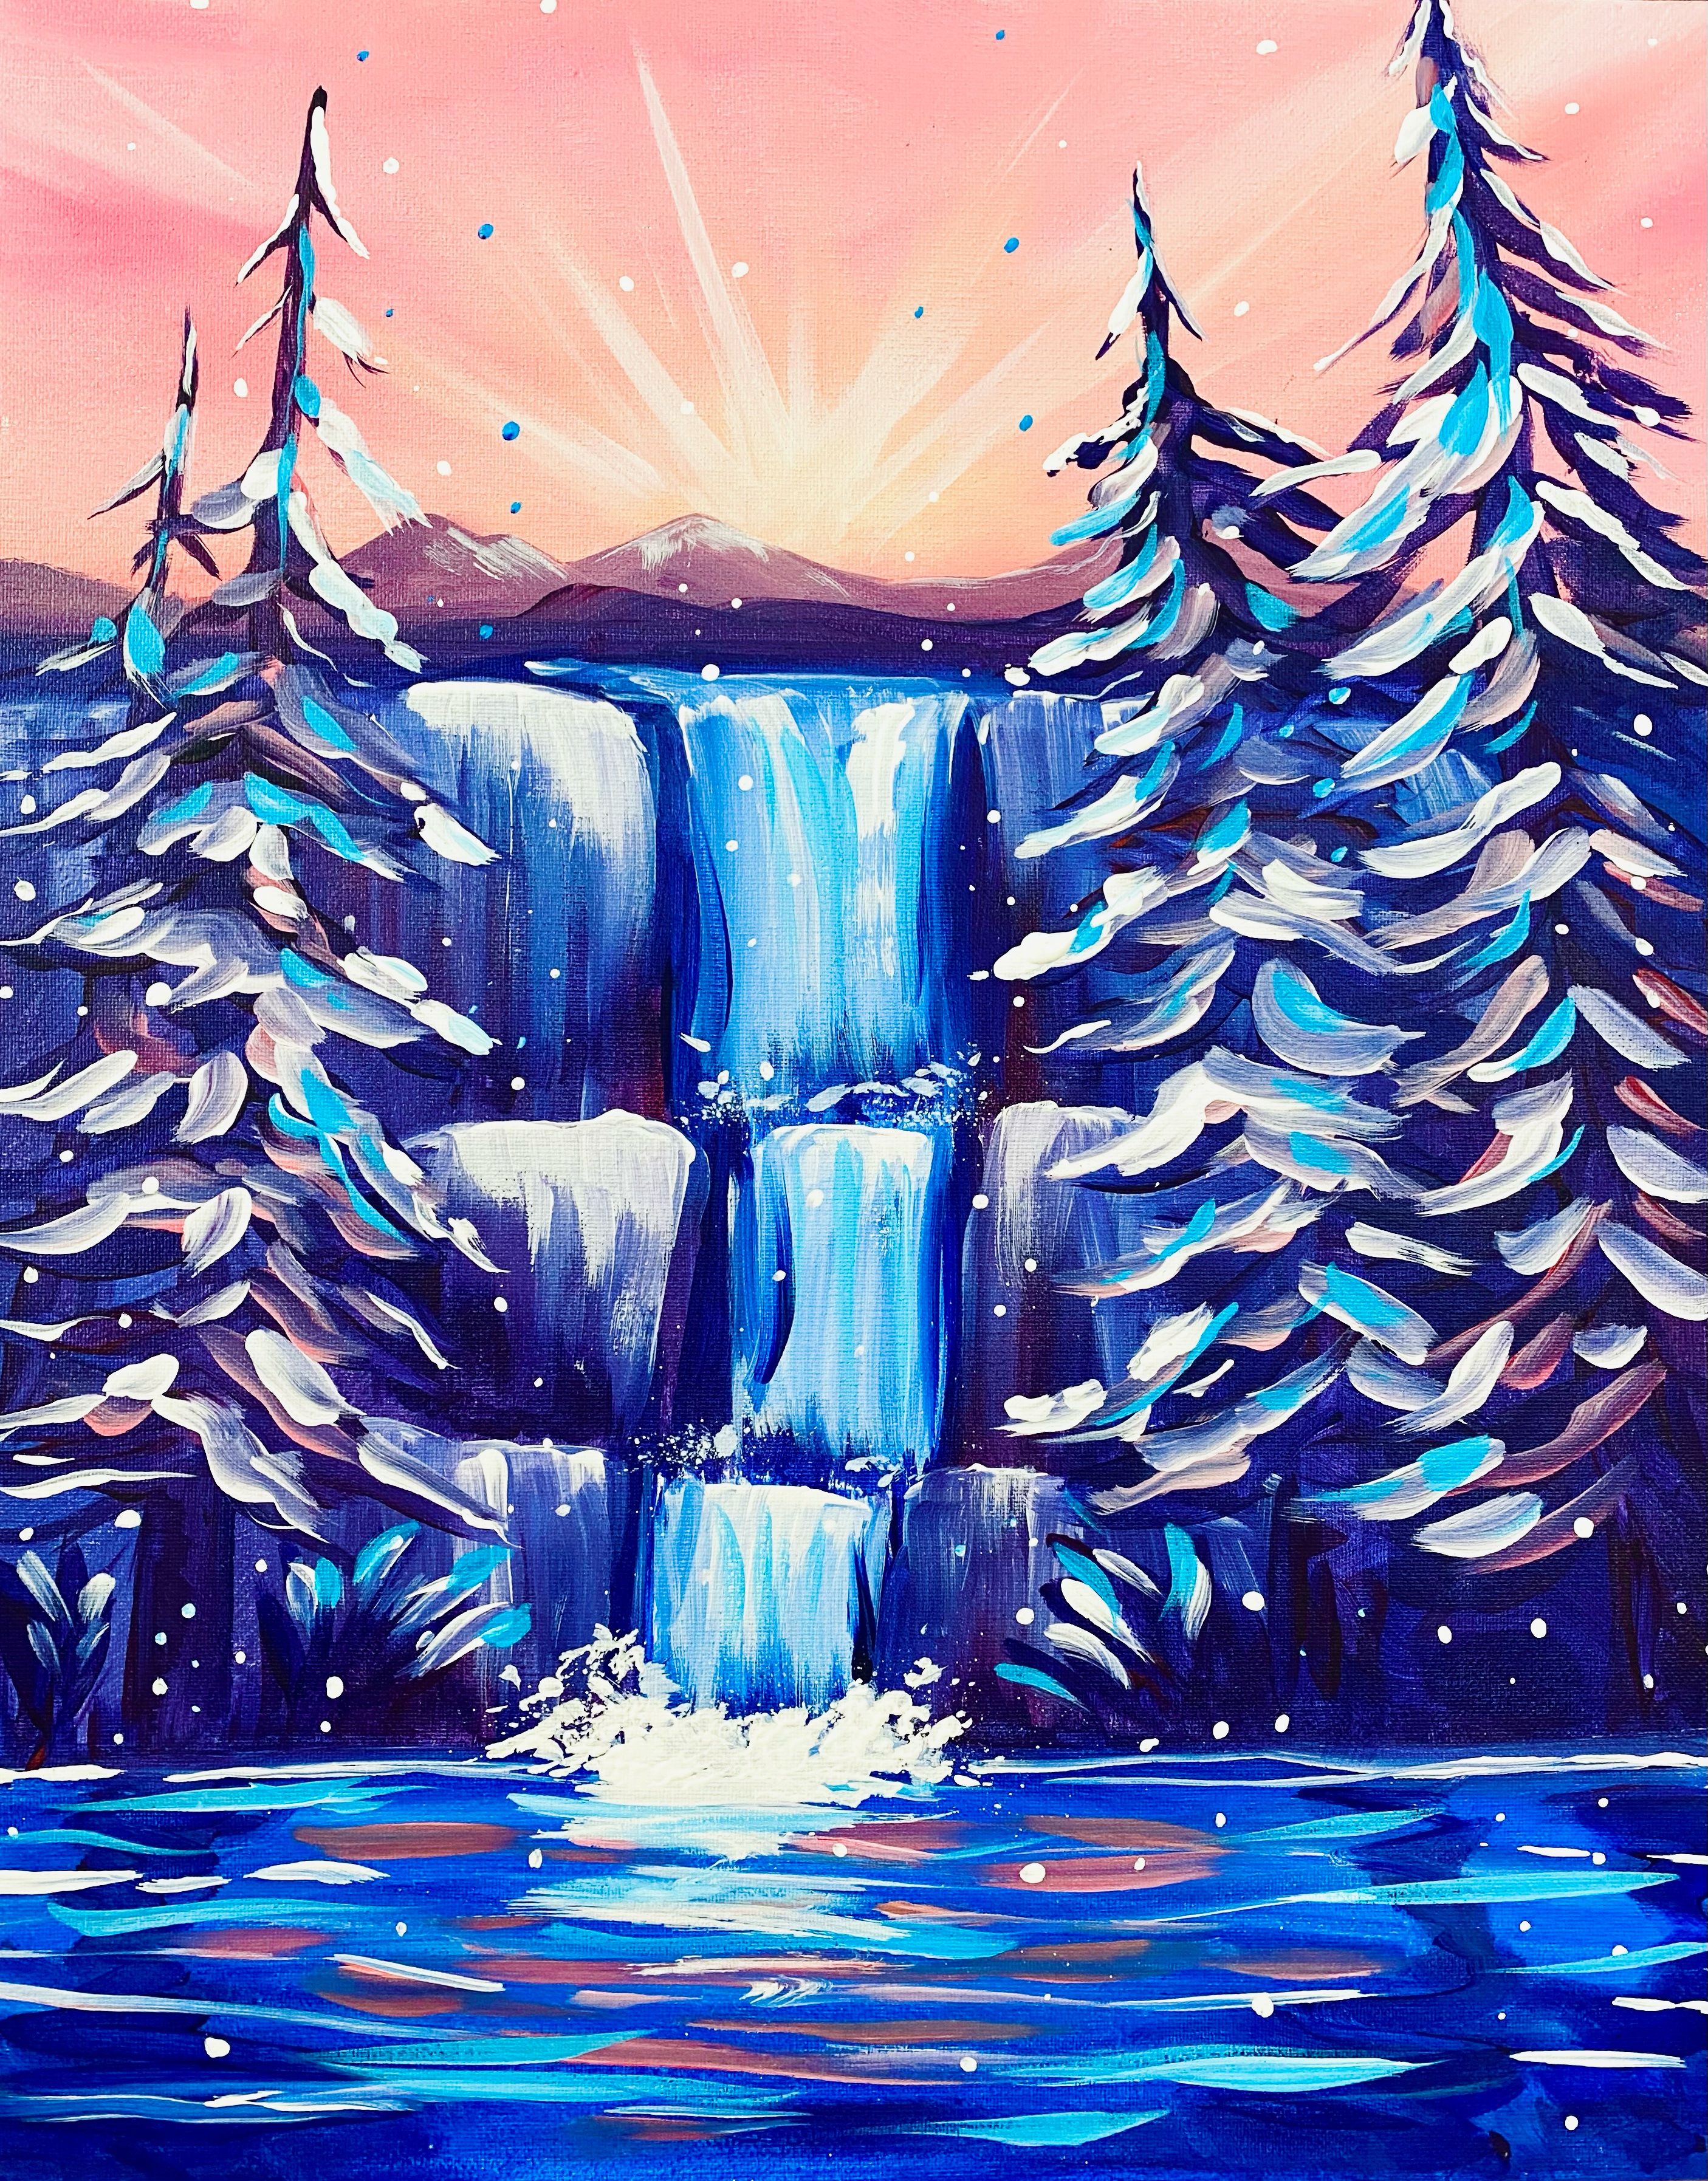 A Frozen Winter Falls experience project by Yaymaker